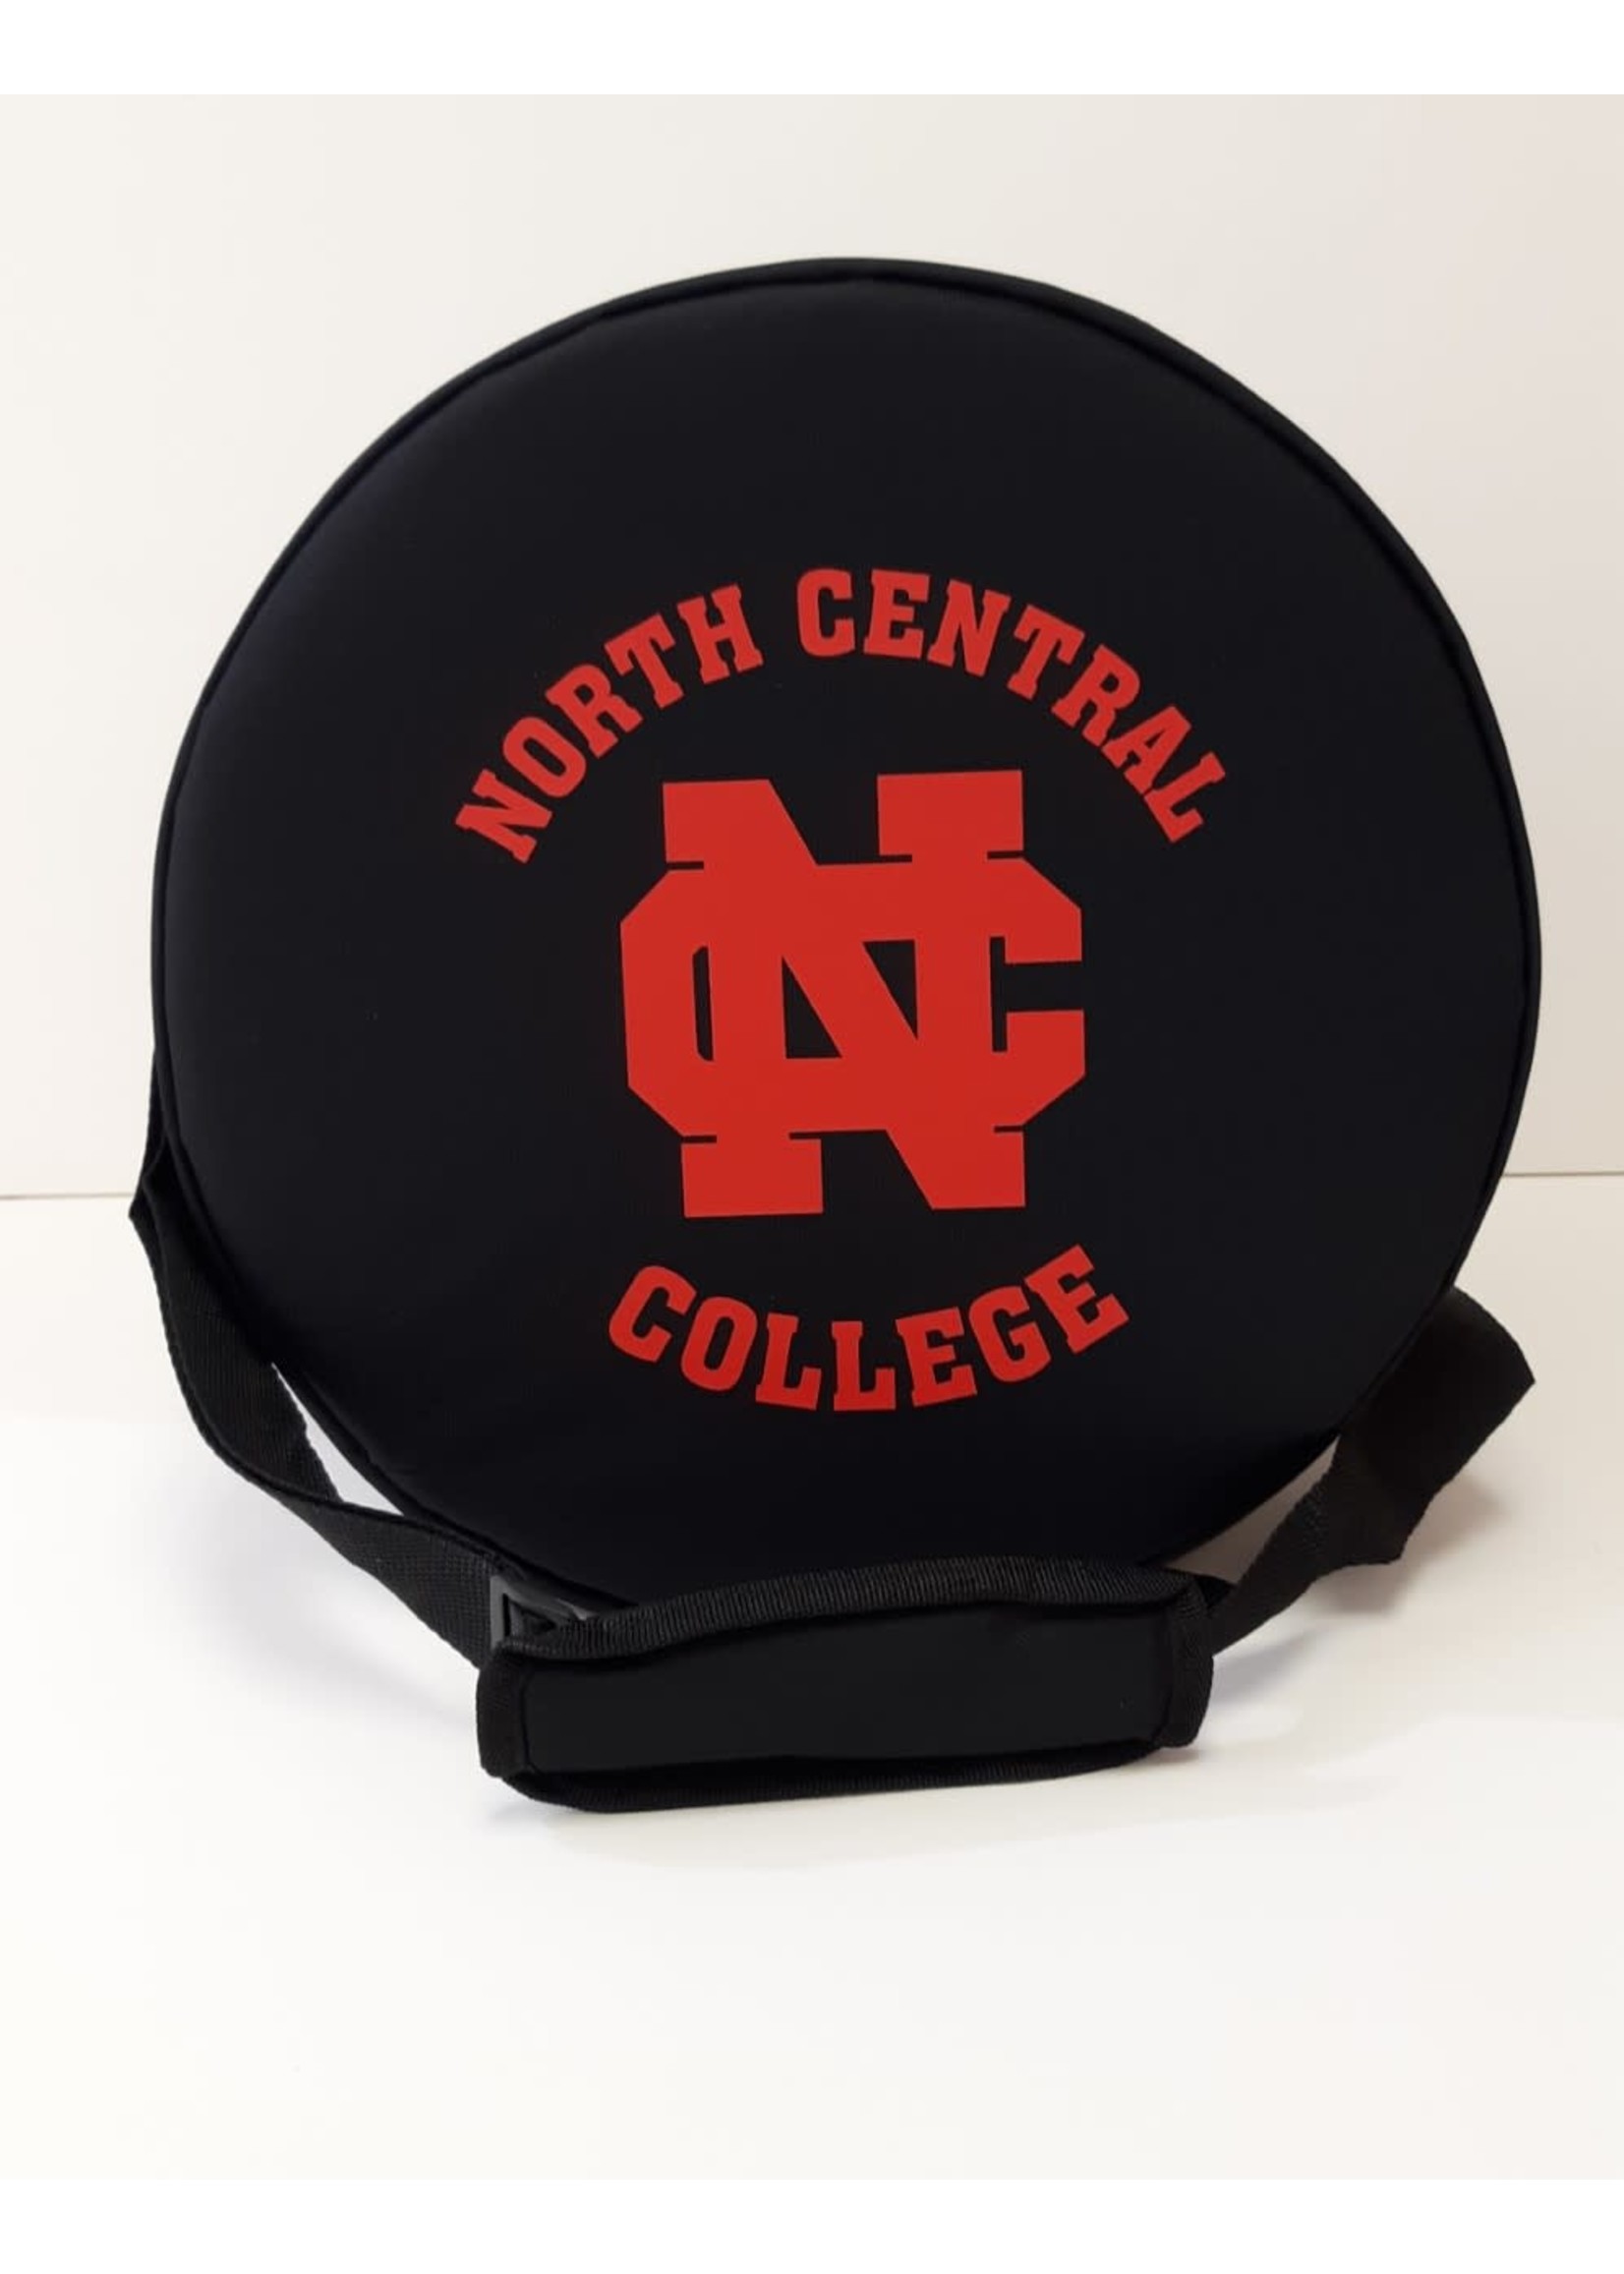 Neil Enterprises North Central College Tailgate Hexagon Cooler and Seat